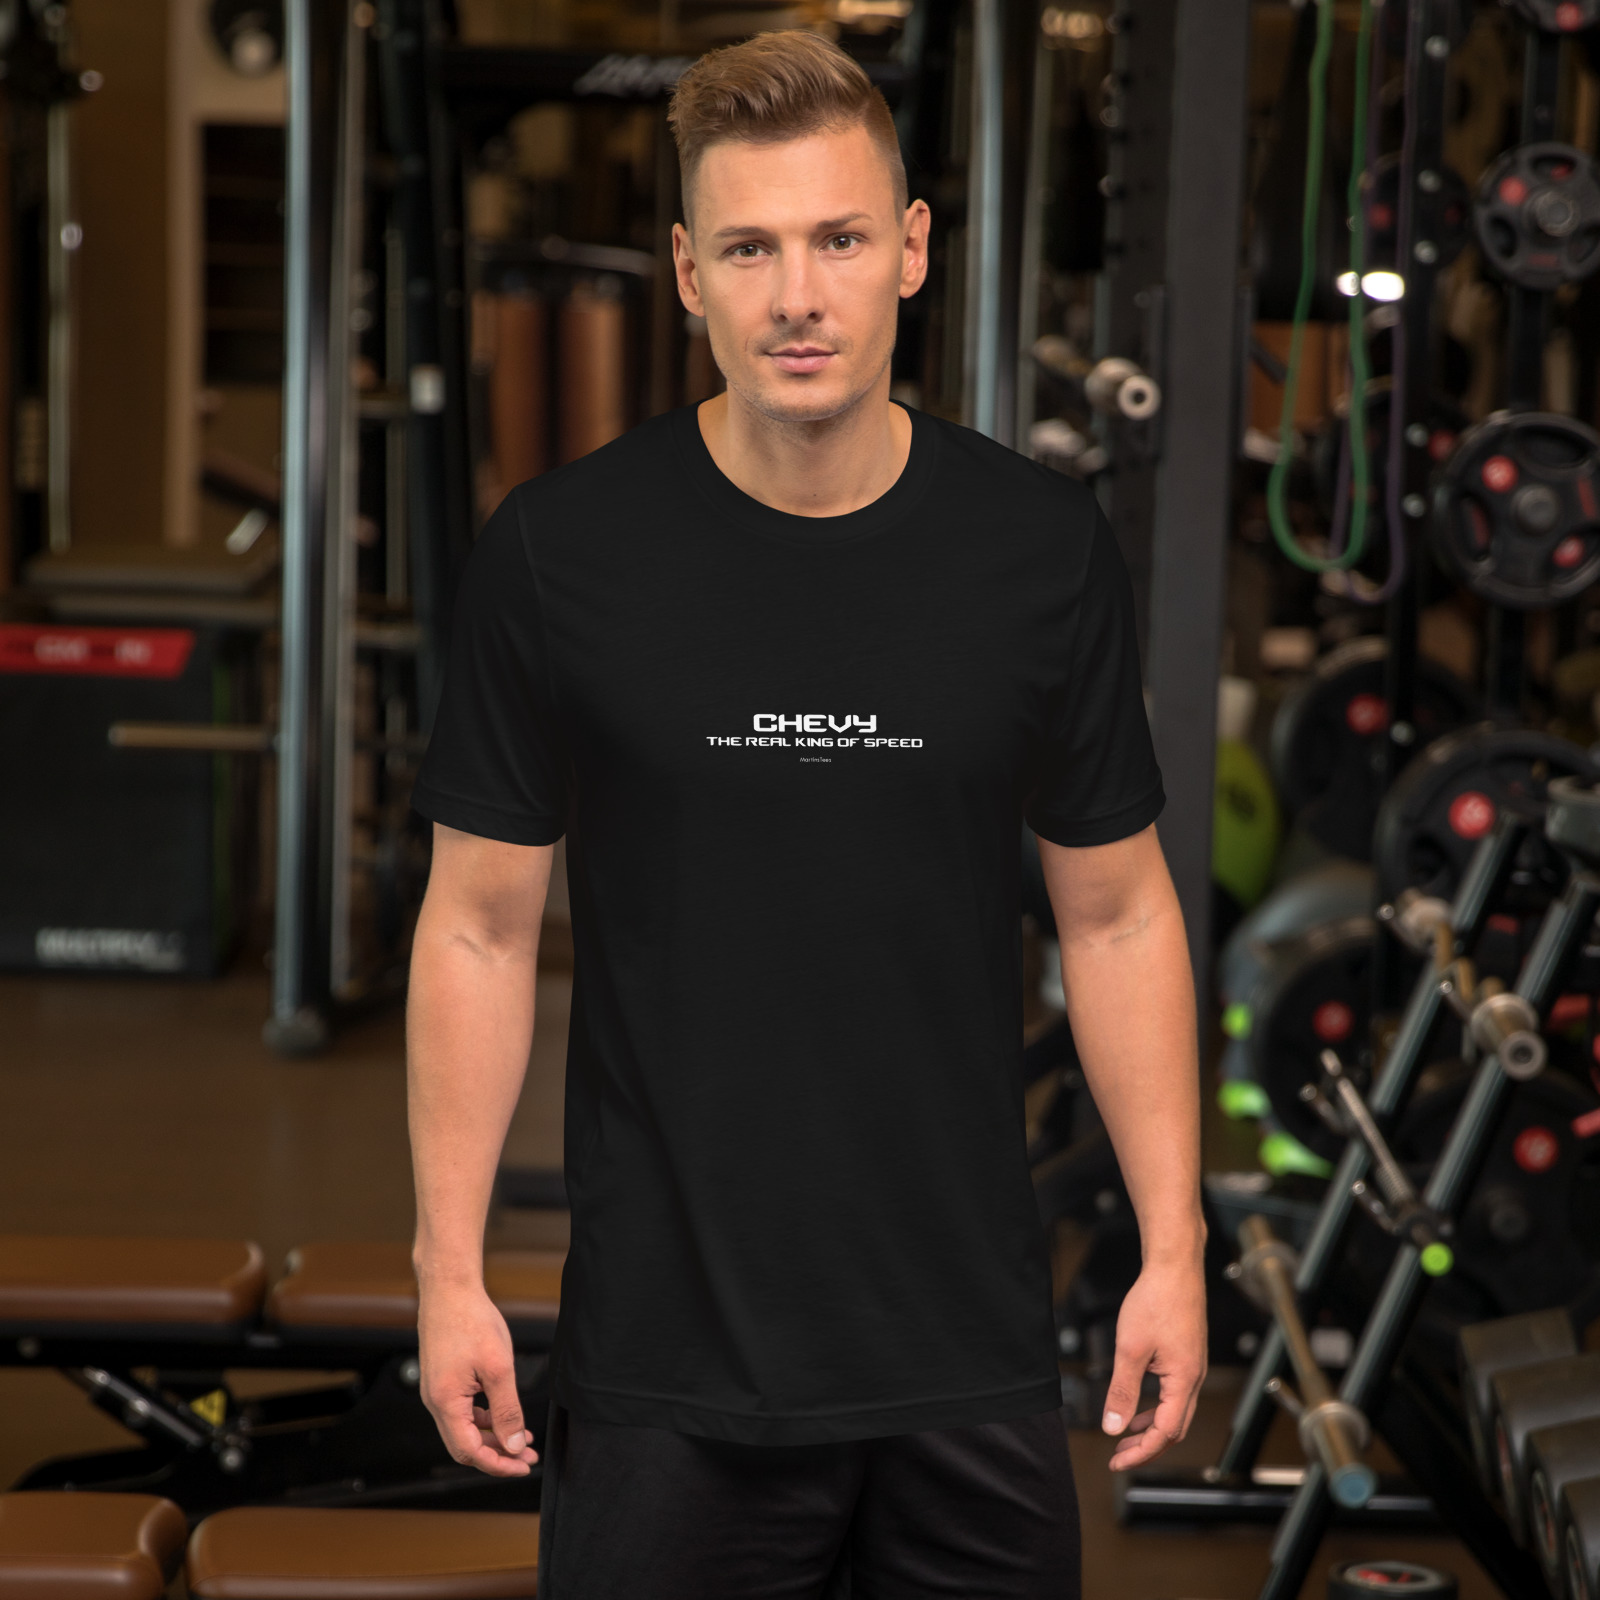 T-shirt: CHEVY - THE REAL KING OF SPEED